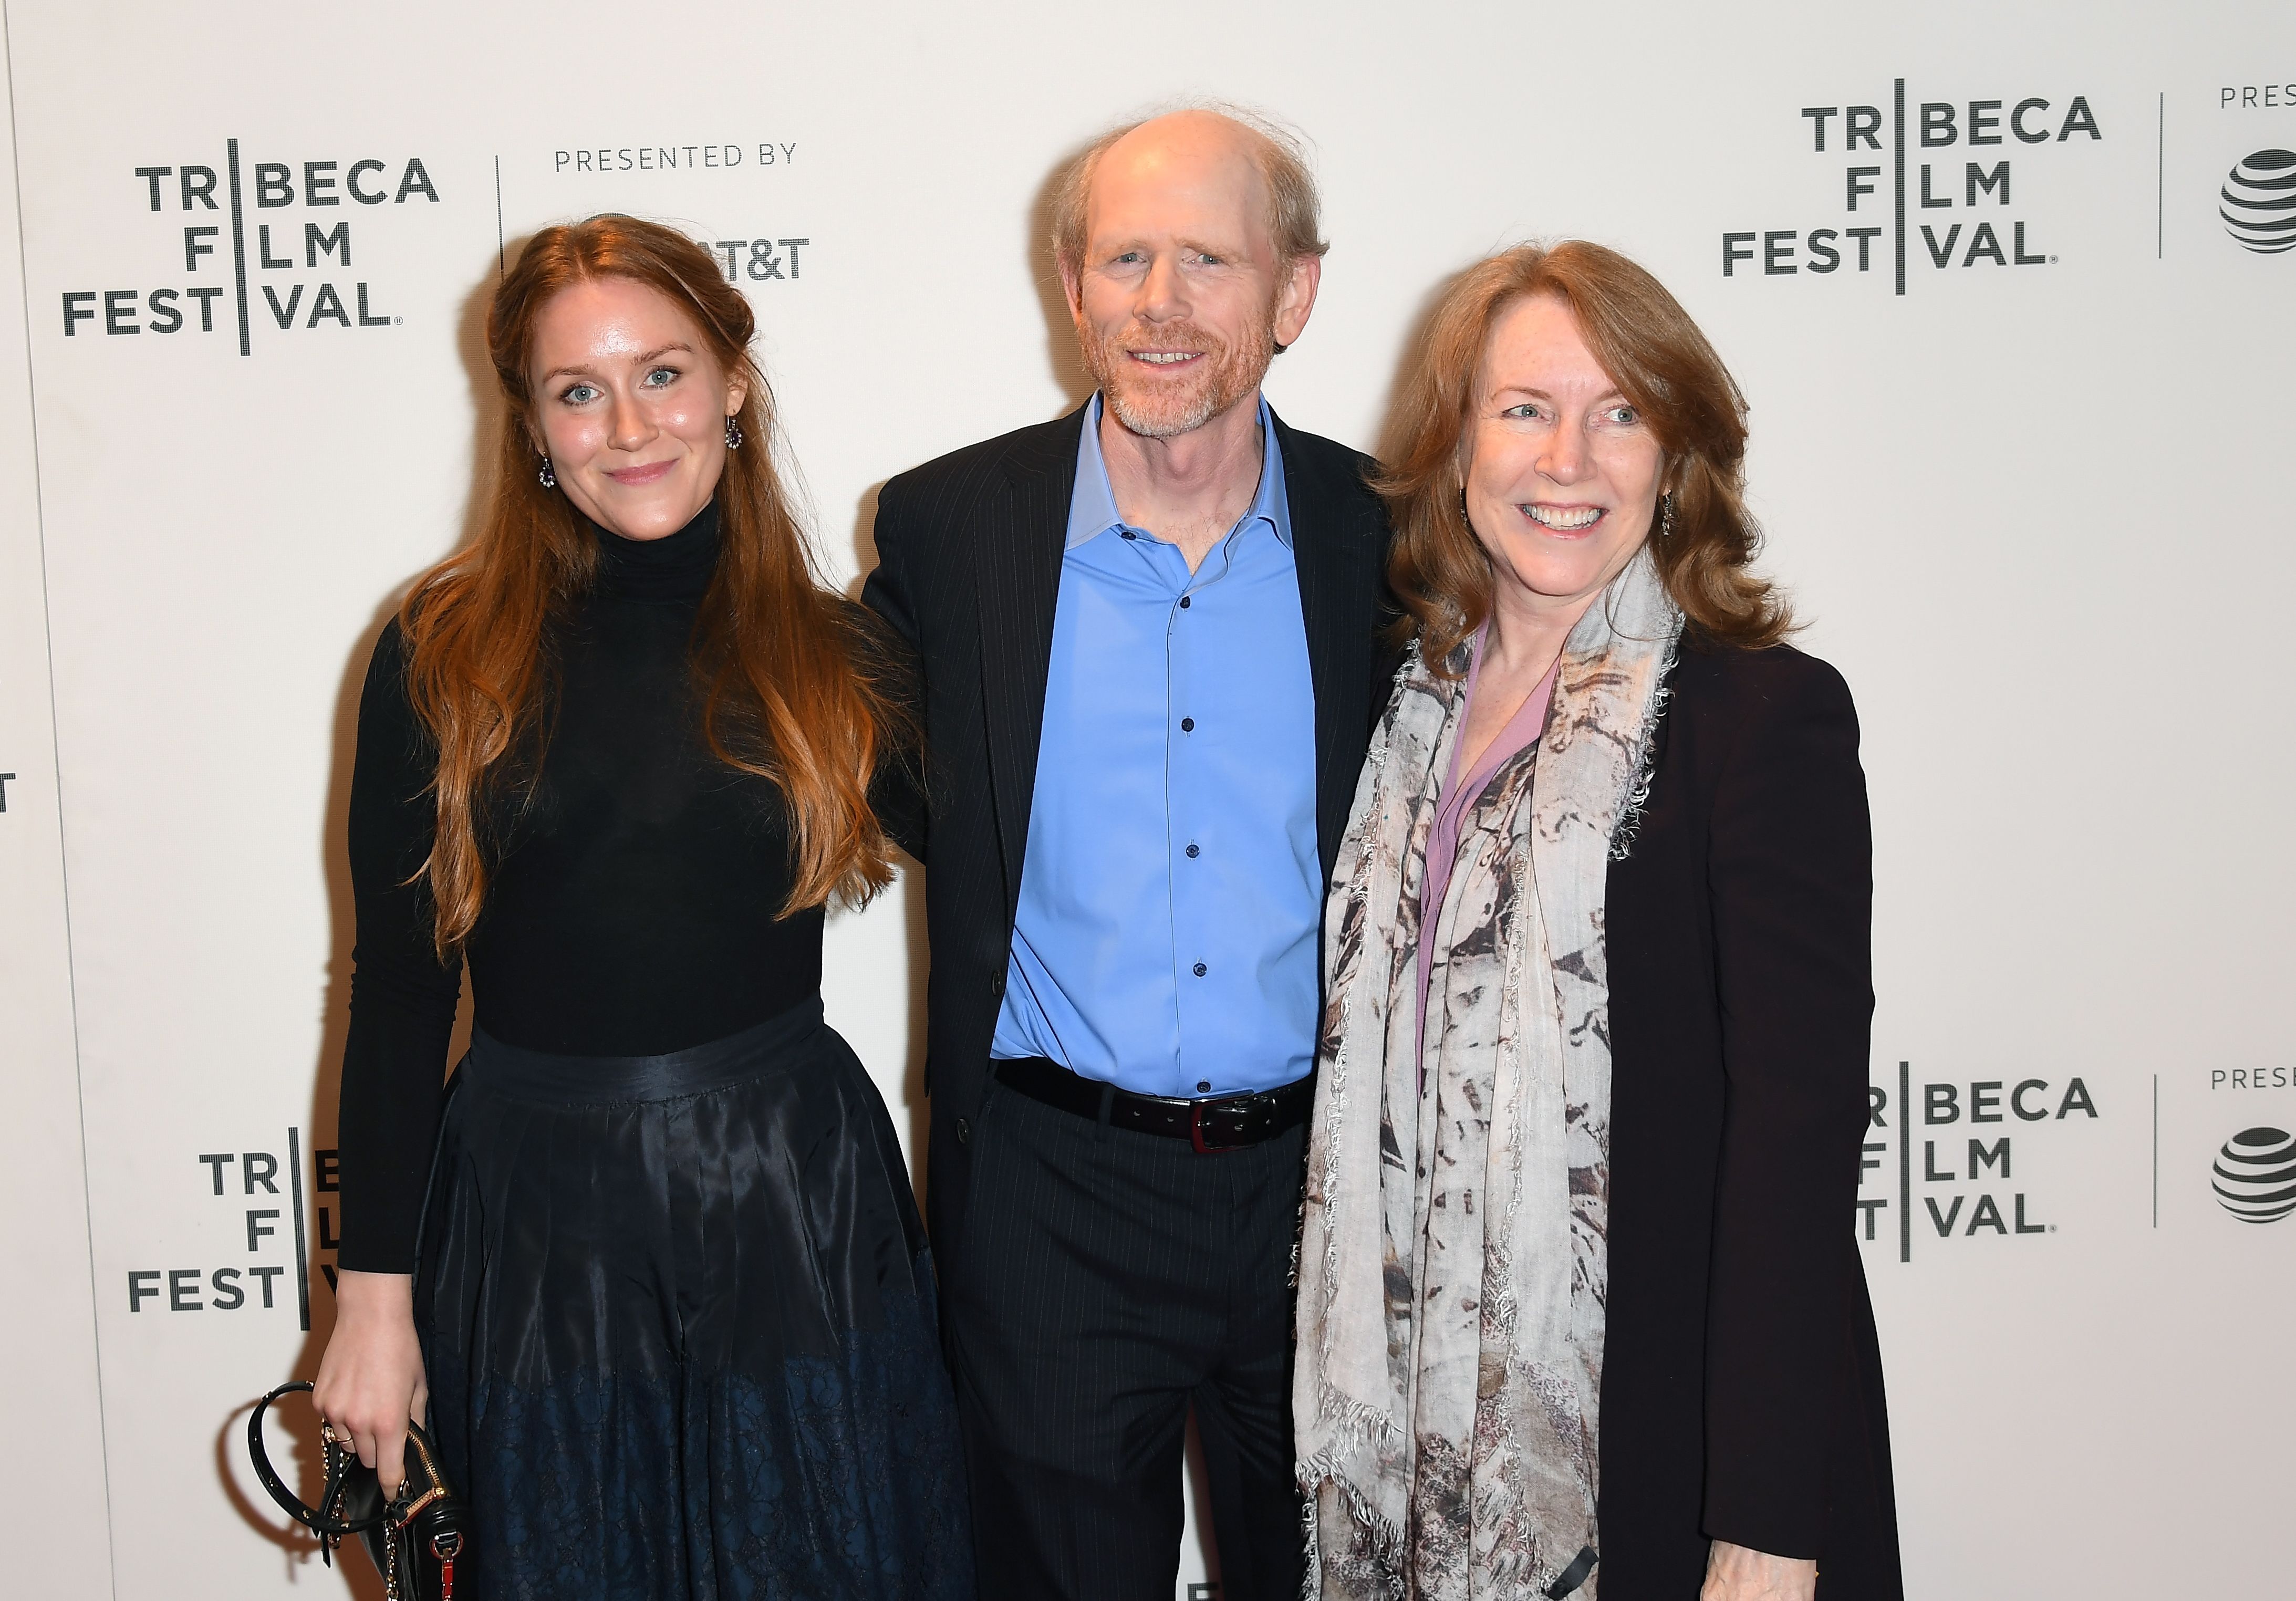 Actress Paige Howard with her father, director Ron Howard and mother Cheryl Howard attend National Geographic's "Genius" premiere during the 2017 Tribeca Film Festival at BMCC Tribeca PAC on April 20, 2017 in New York City | Source: Getty Images